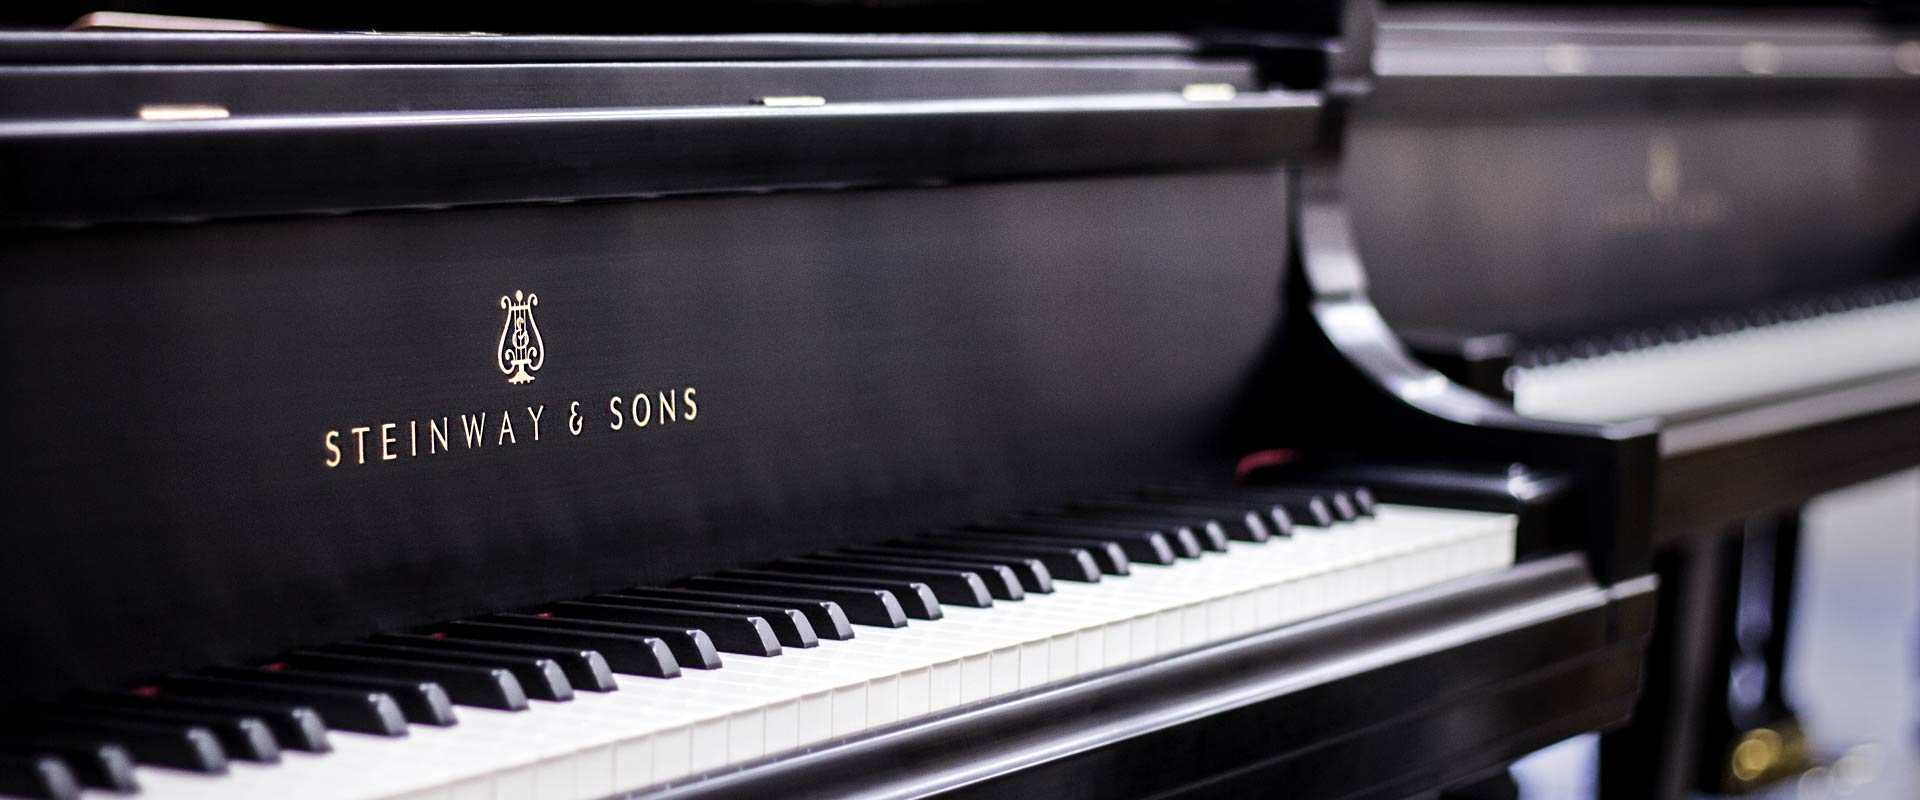 Steinway & Sons Concert Grands - Why Does Steinway Dominate the Concert Market? - The Piano War